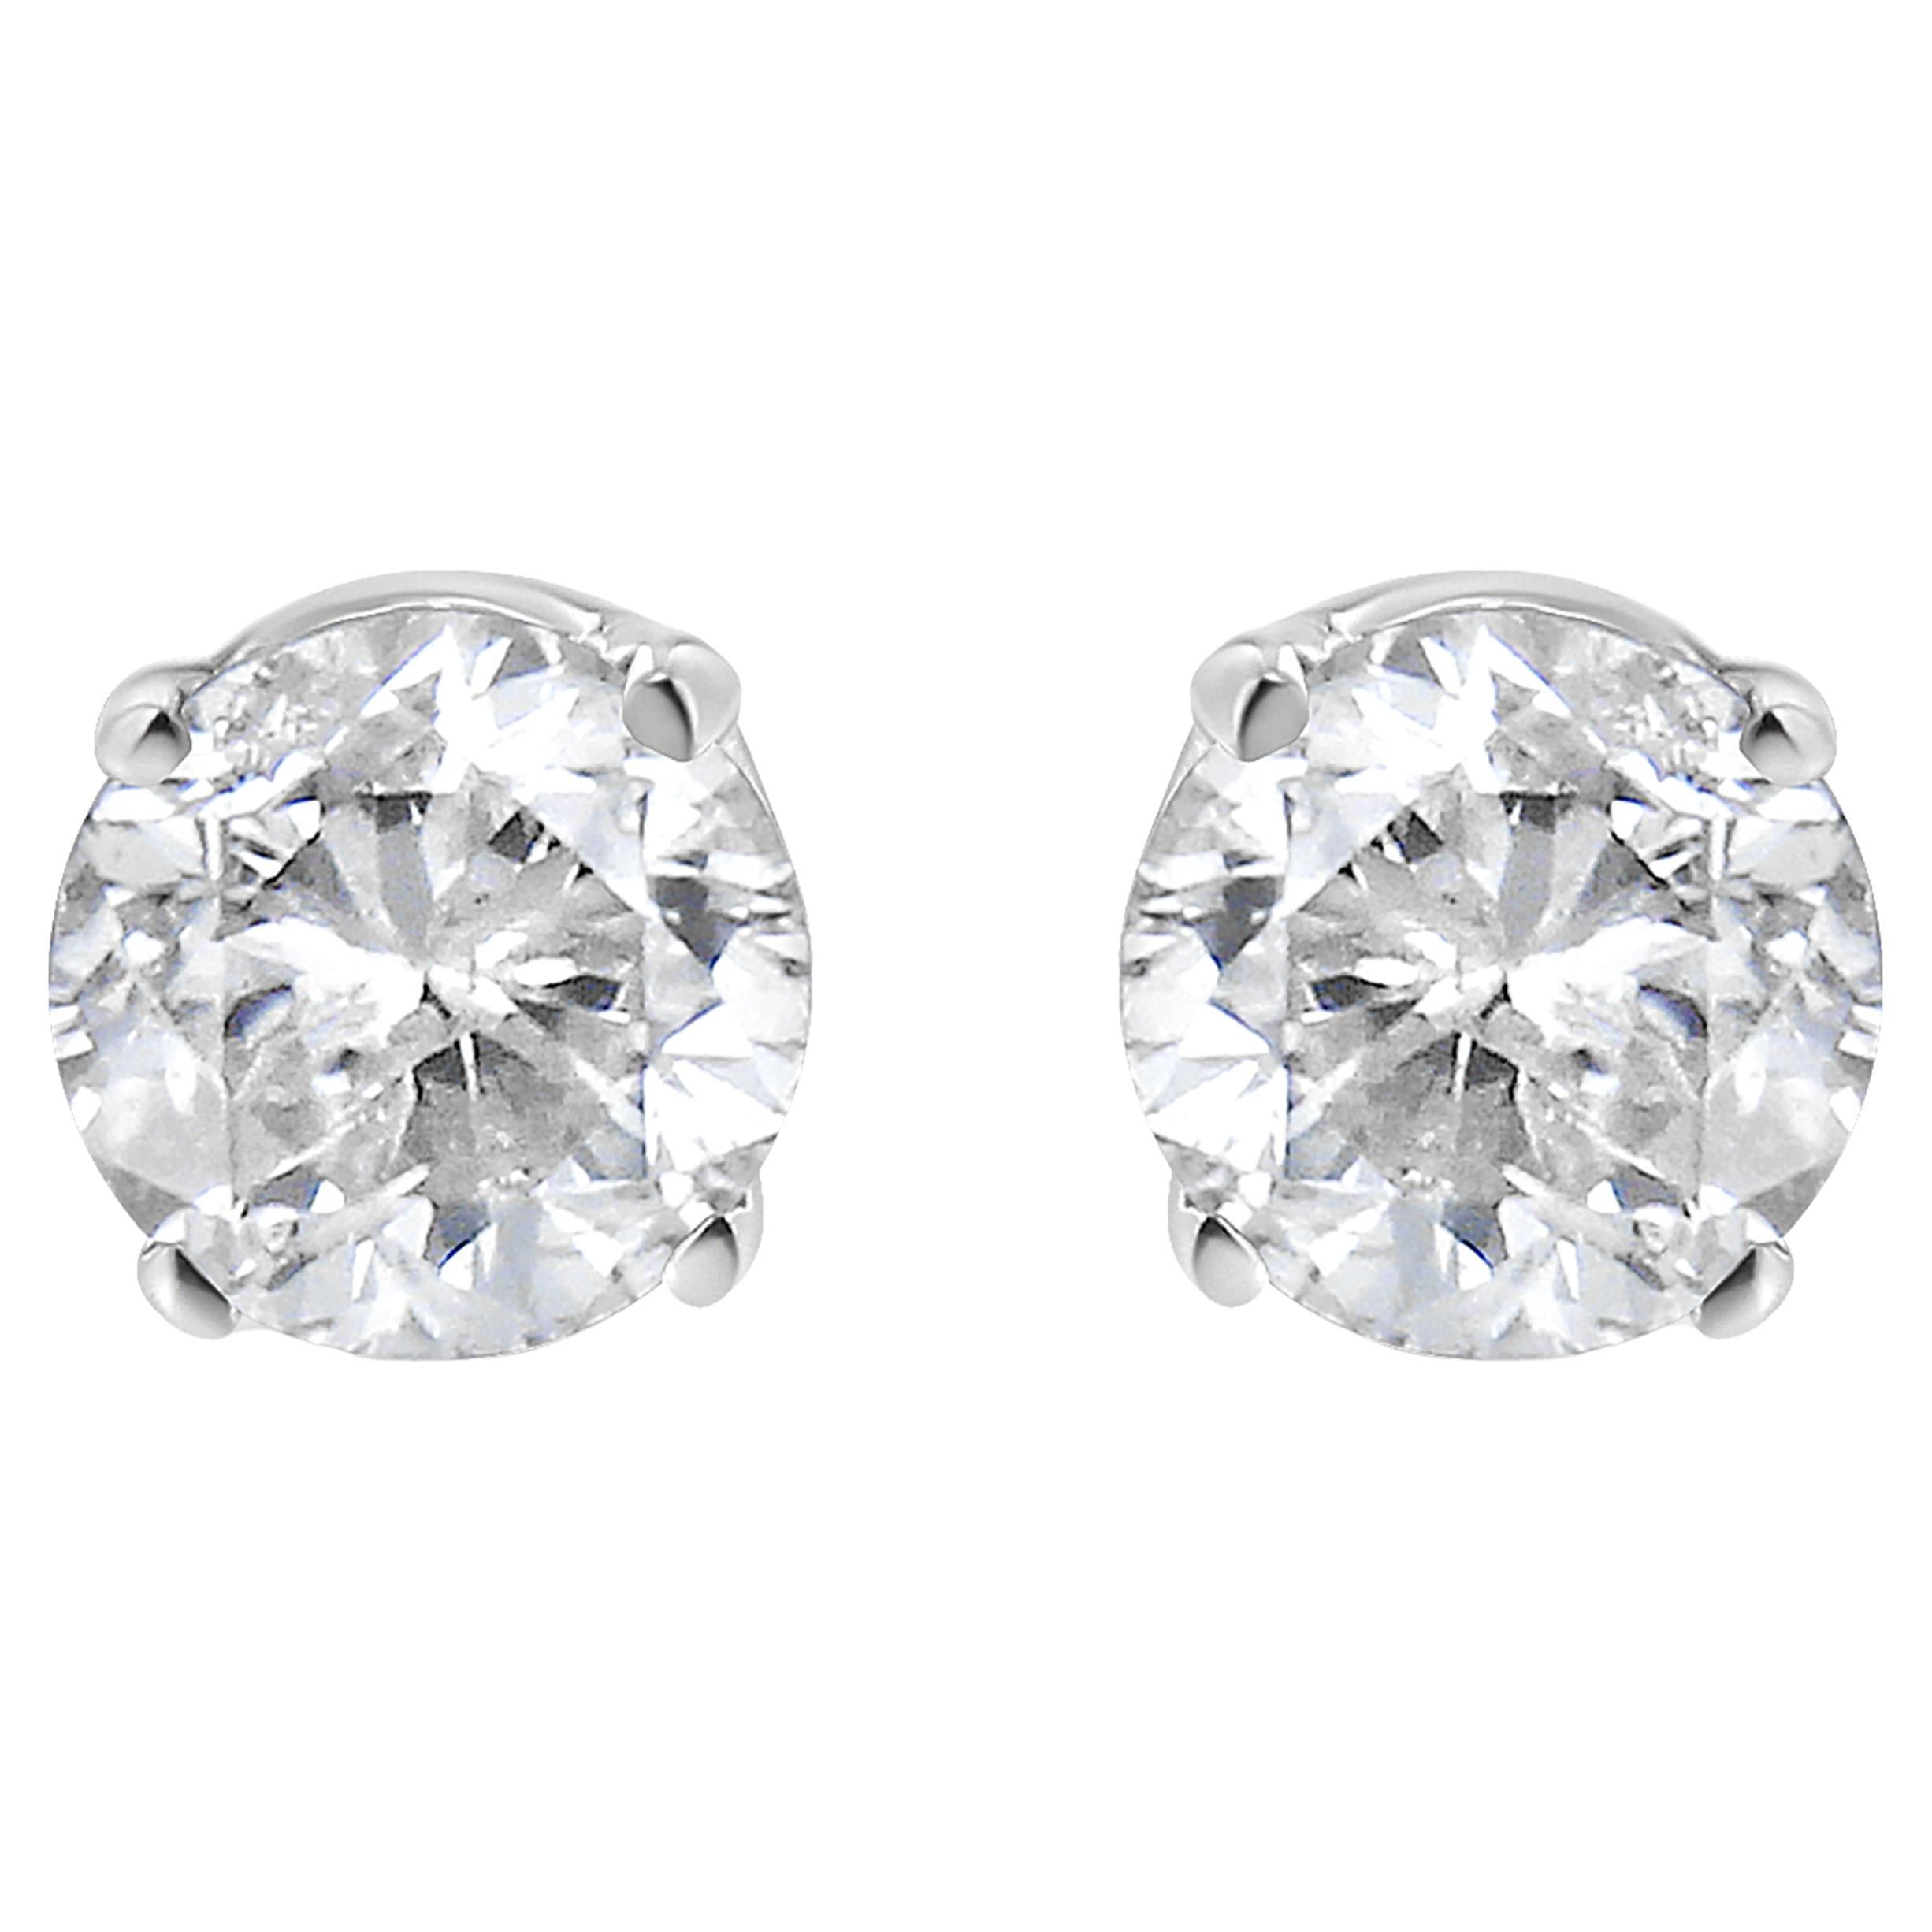 AGS Certified 14K White Gold 1.0 Carat Solitaire Diamond Push Back Stud Earrings